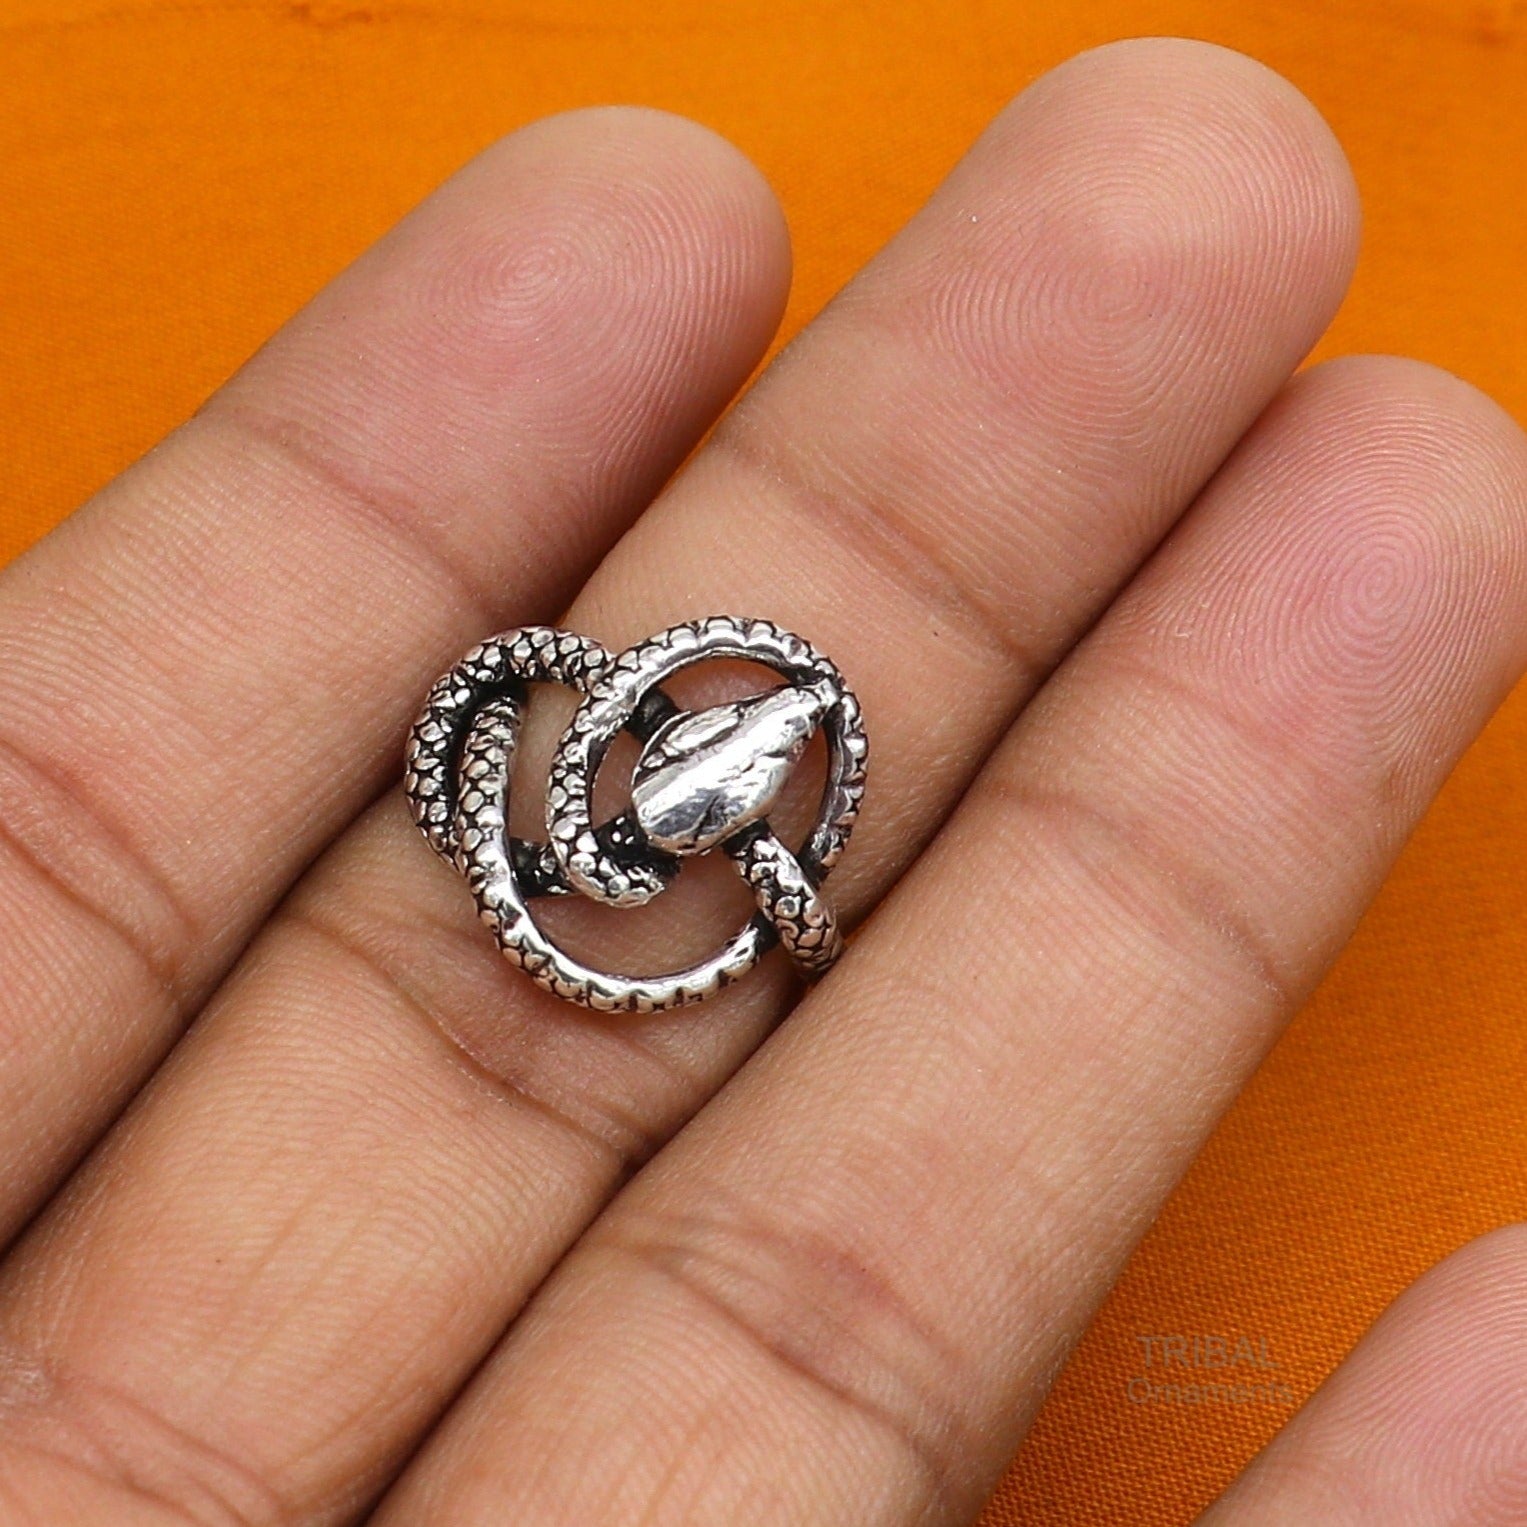 Pure 925 sterling silver handmade snake design vintage antique stylish ring  band, gorgeous snake ring best elegant dainty jewelry ring281 TRIBAL  ORNAMENTS